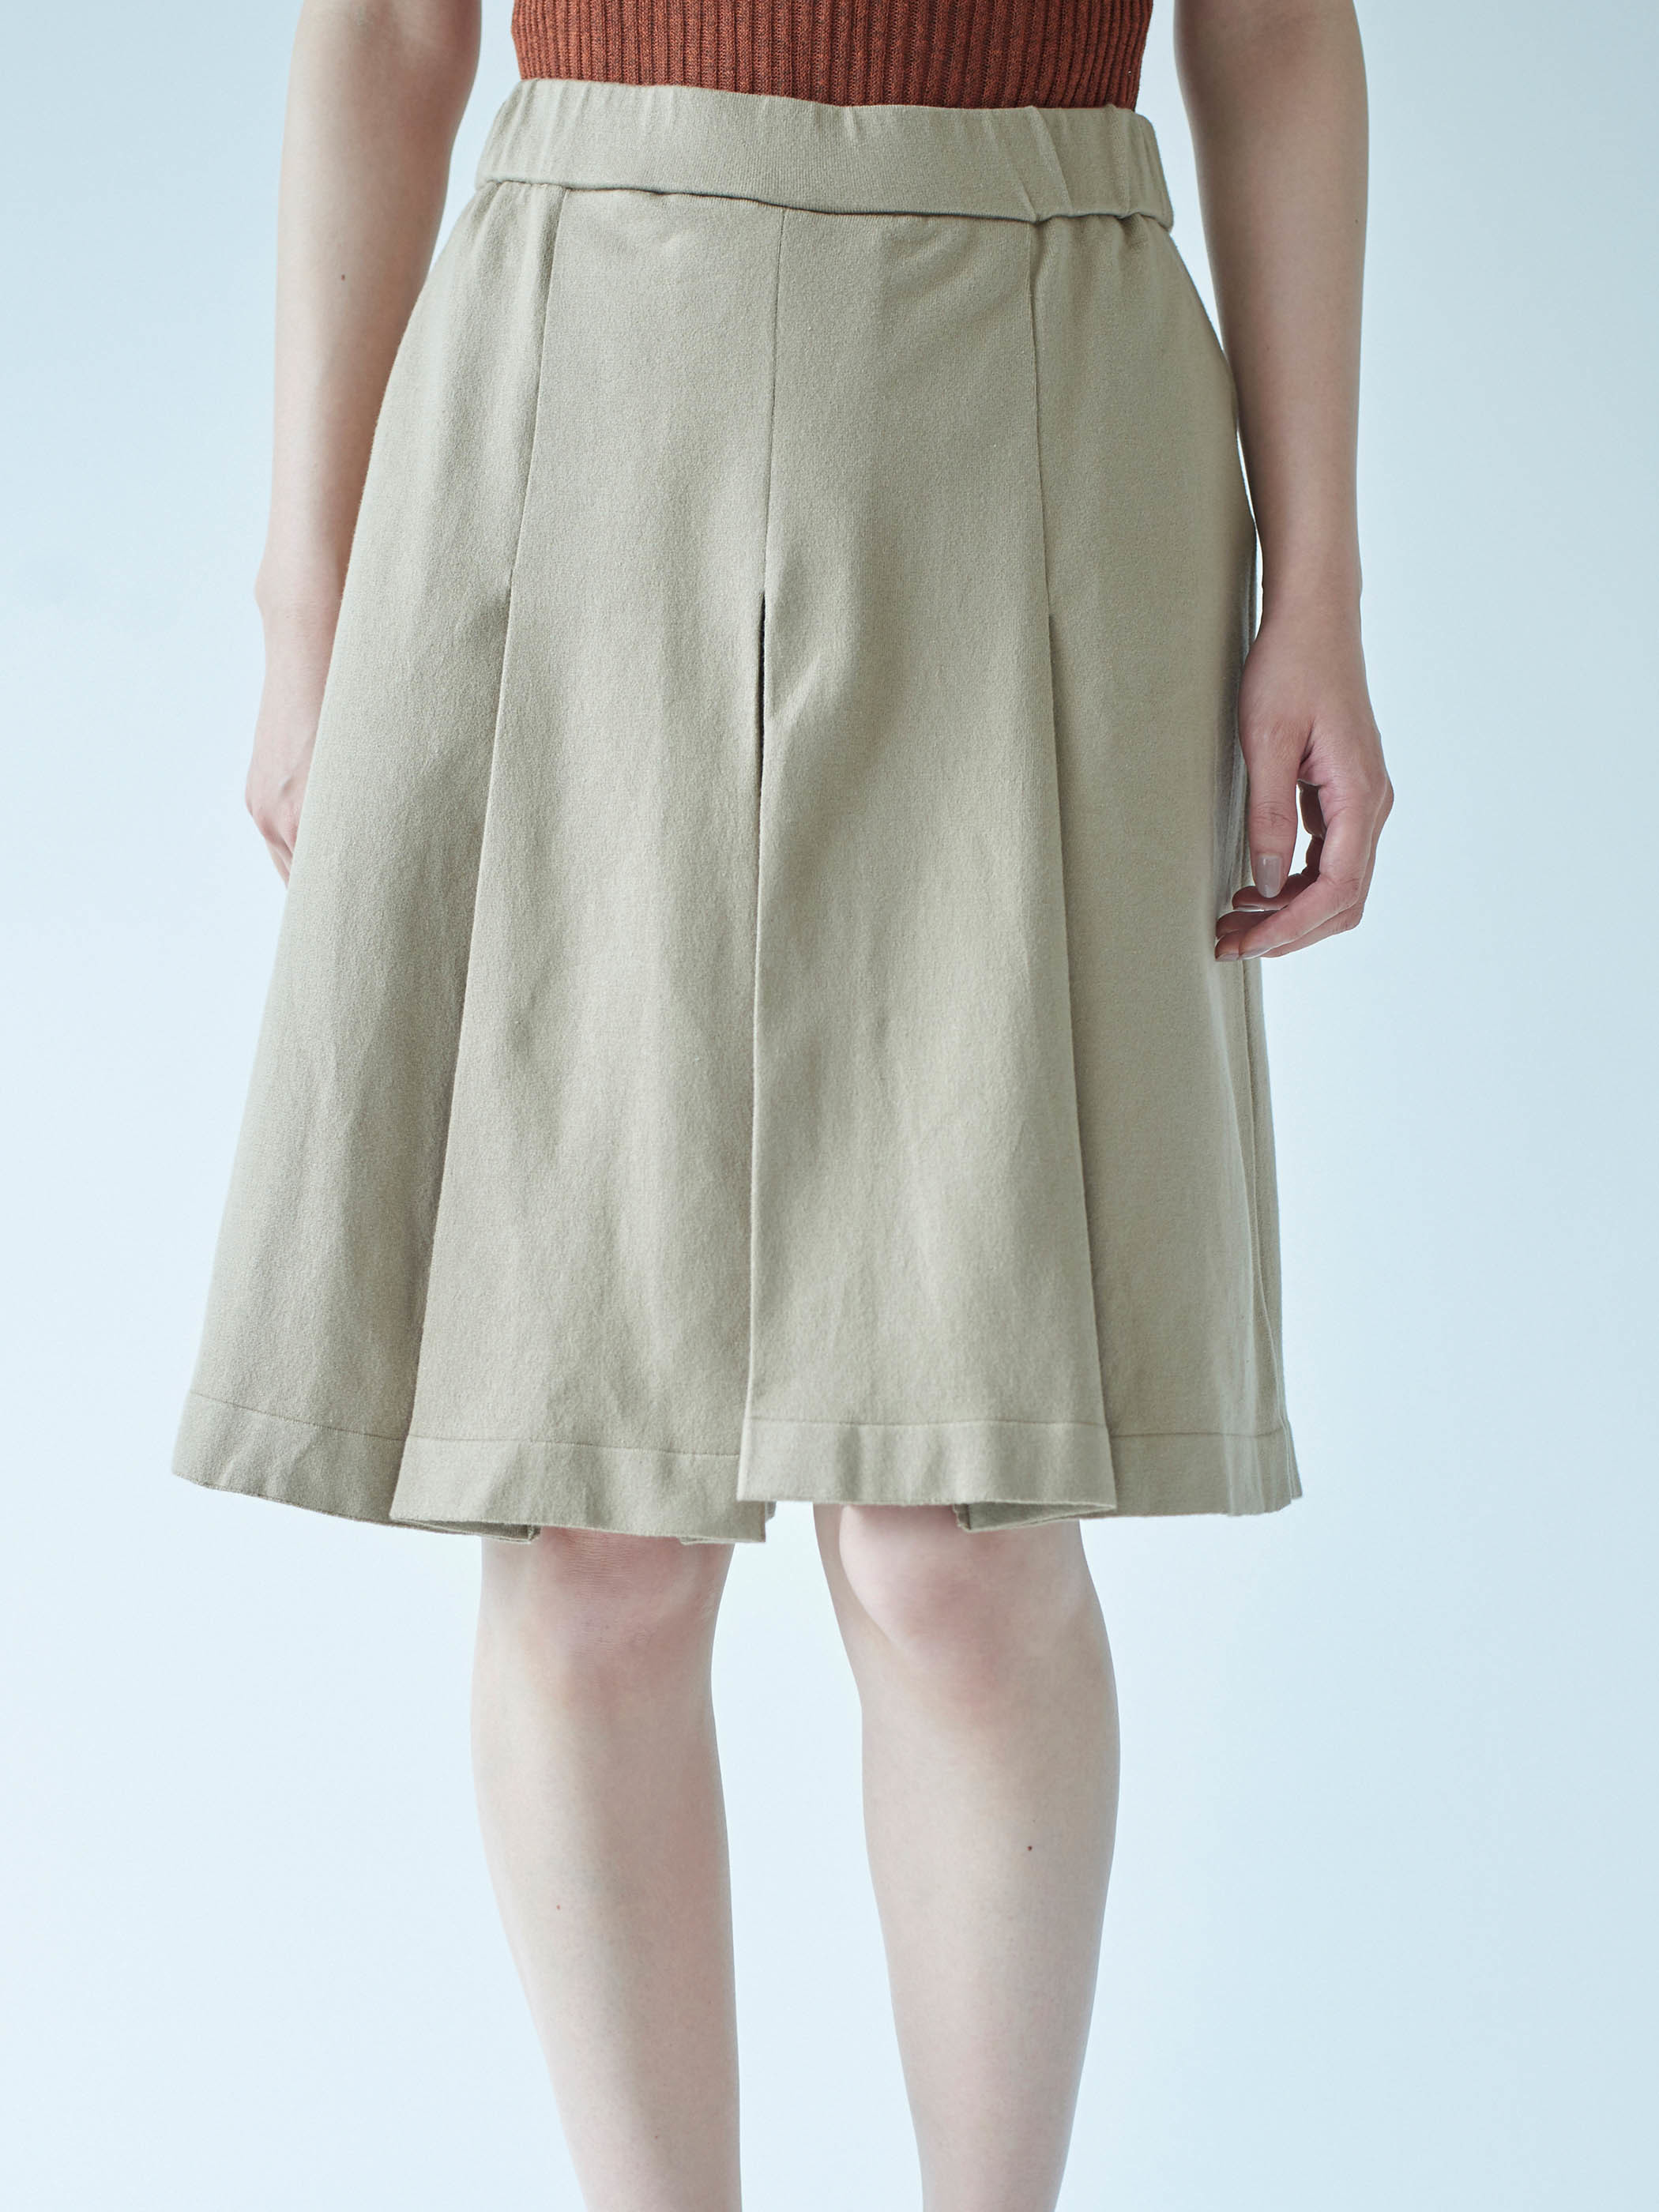 Work Wear collection Women’s Culotte Skirt Beige(キュロットスカート・ベージュ) - KNITOLOGY